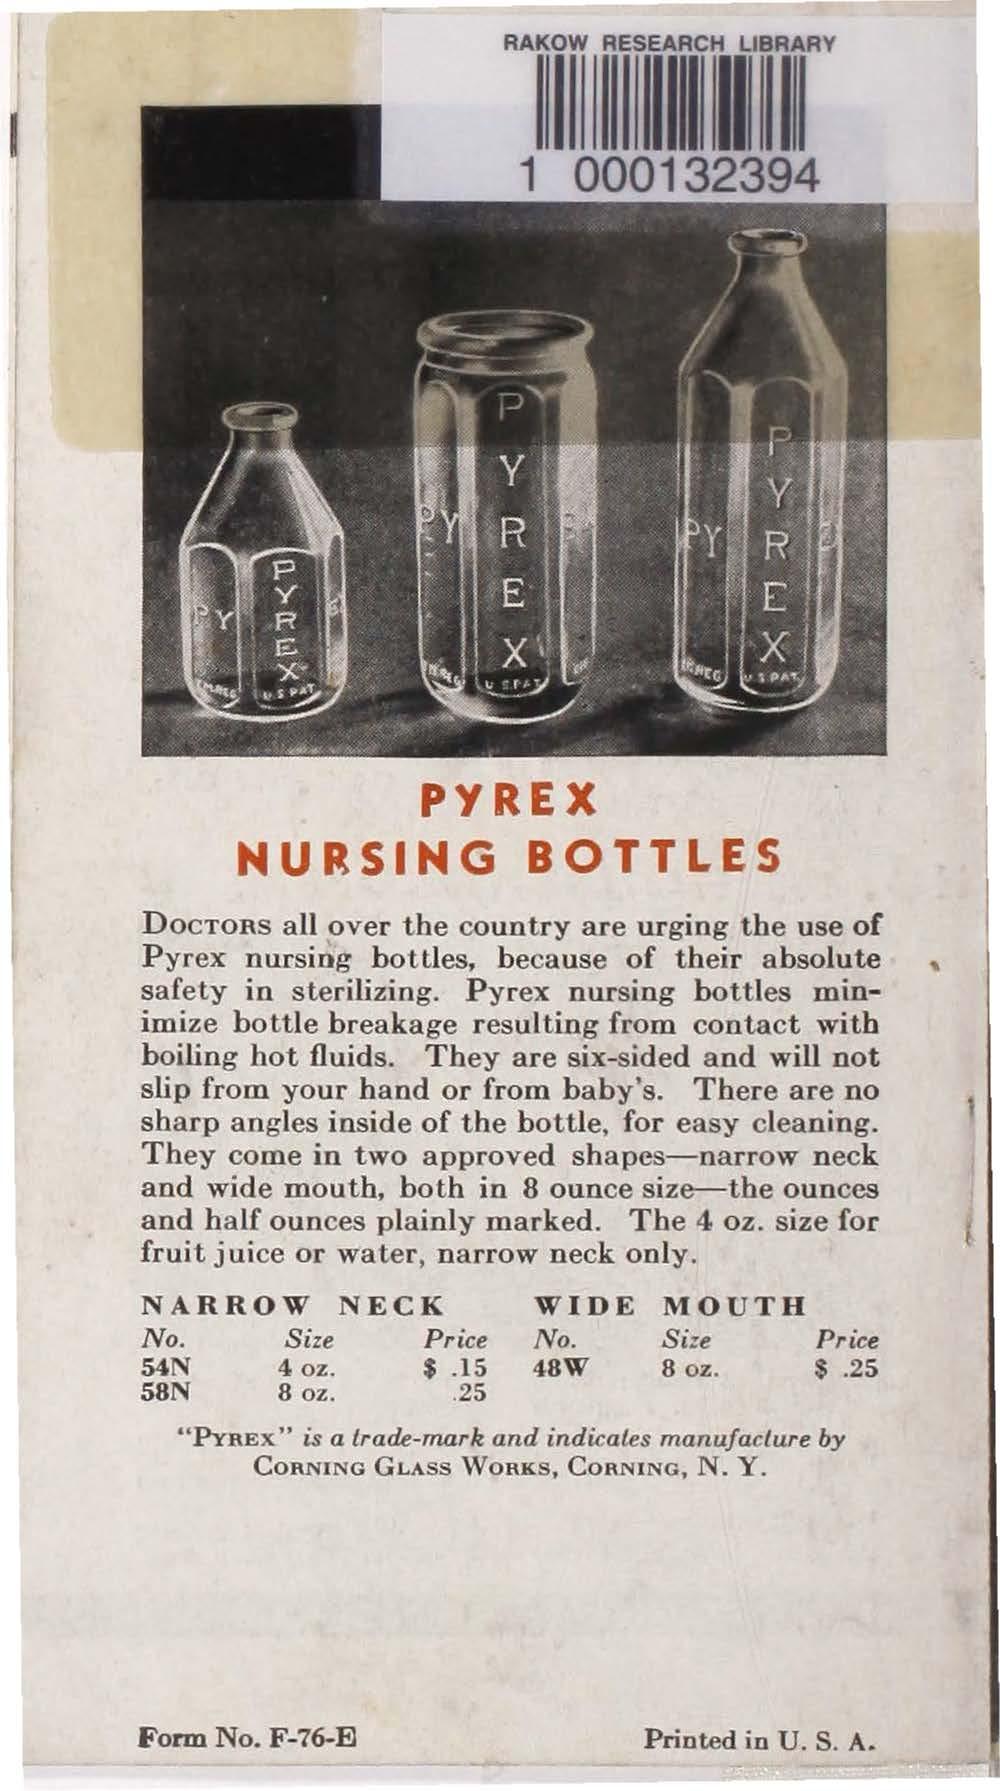 RA~w 1~iimr11i11 1 000132394 PYREX NURSING BOTTLES DocTORS all over the country are urging the use of Pyrex nursiog bott les, because of their absolute safety in sterilizing.